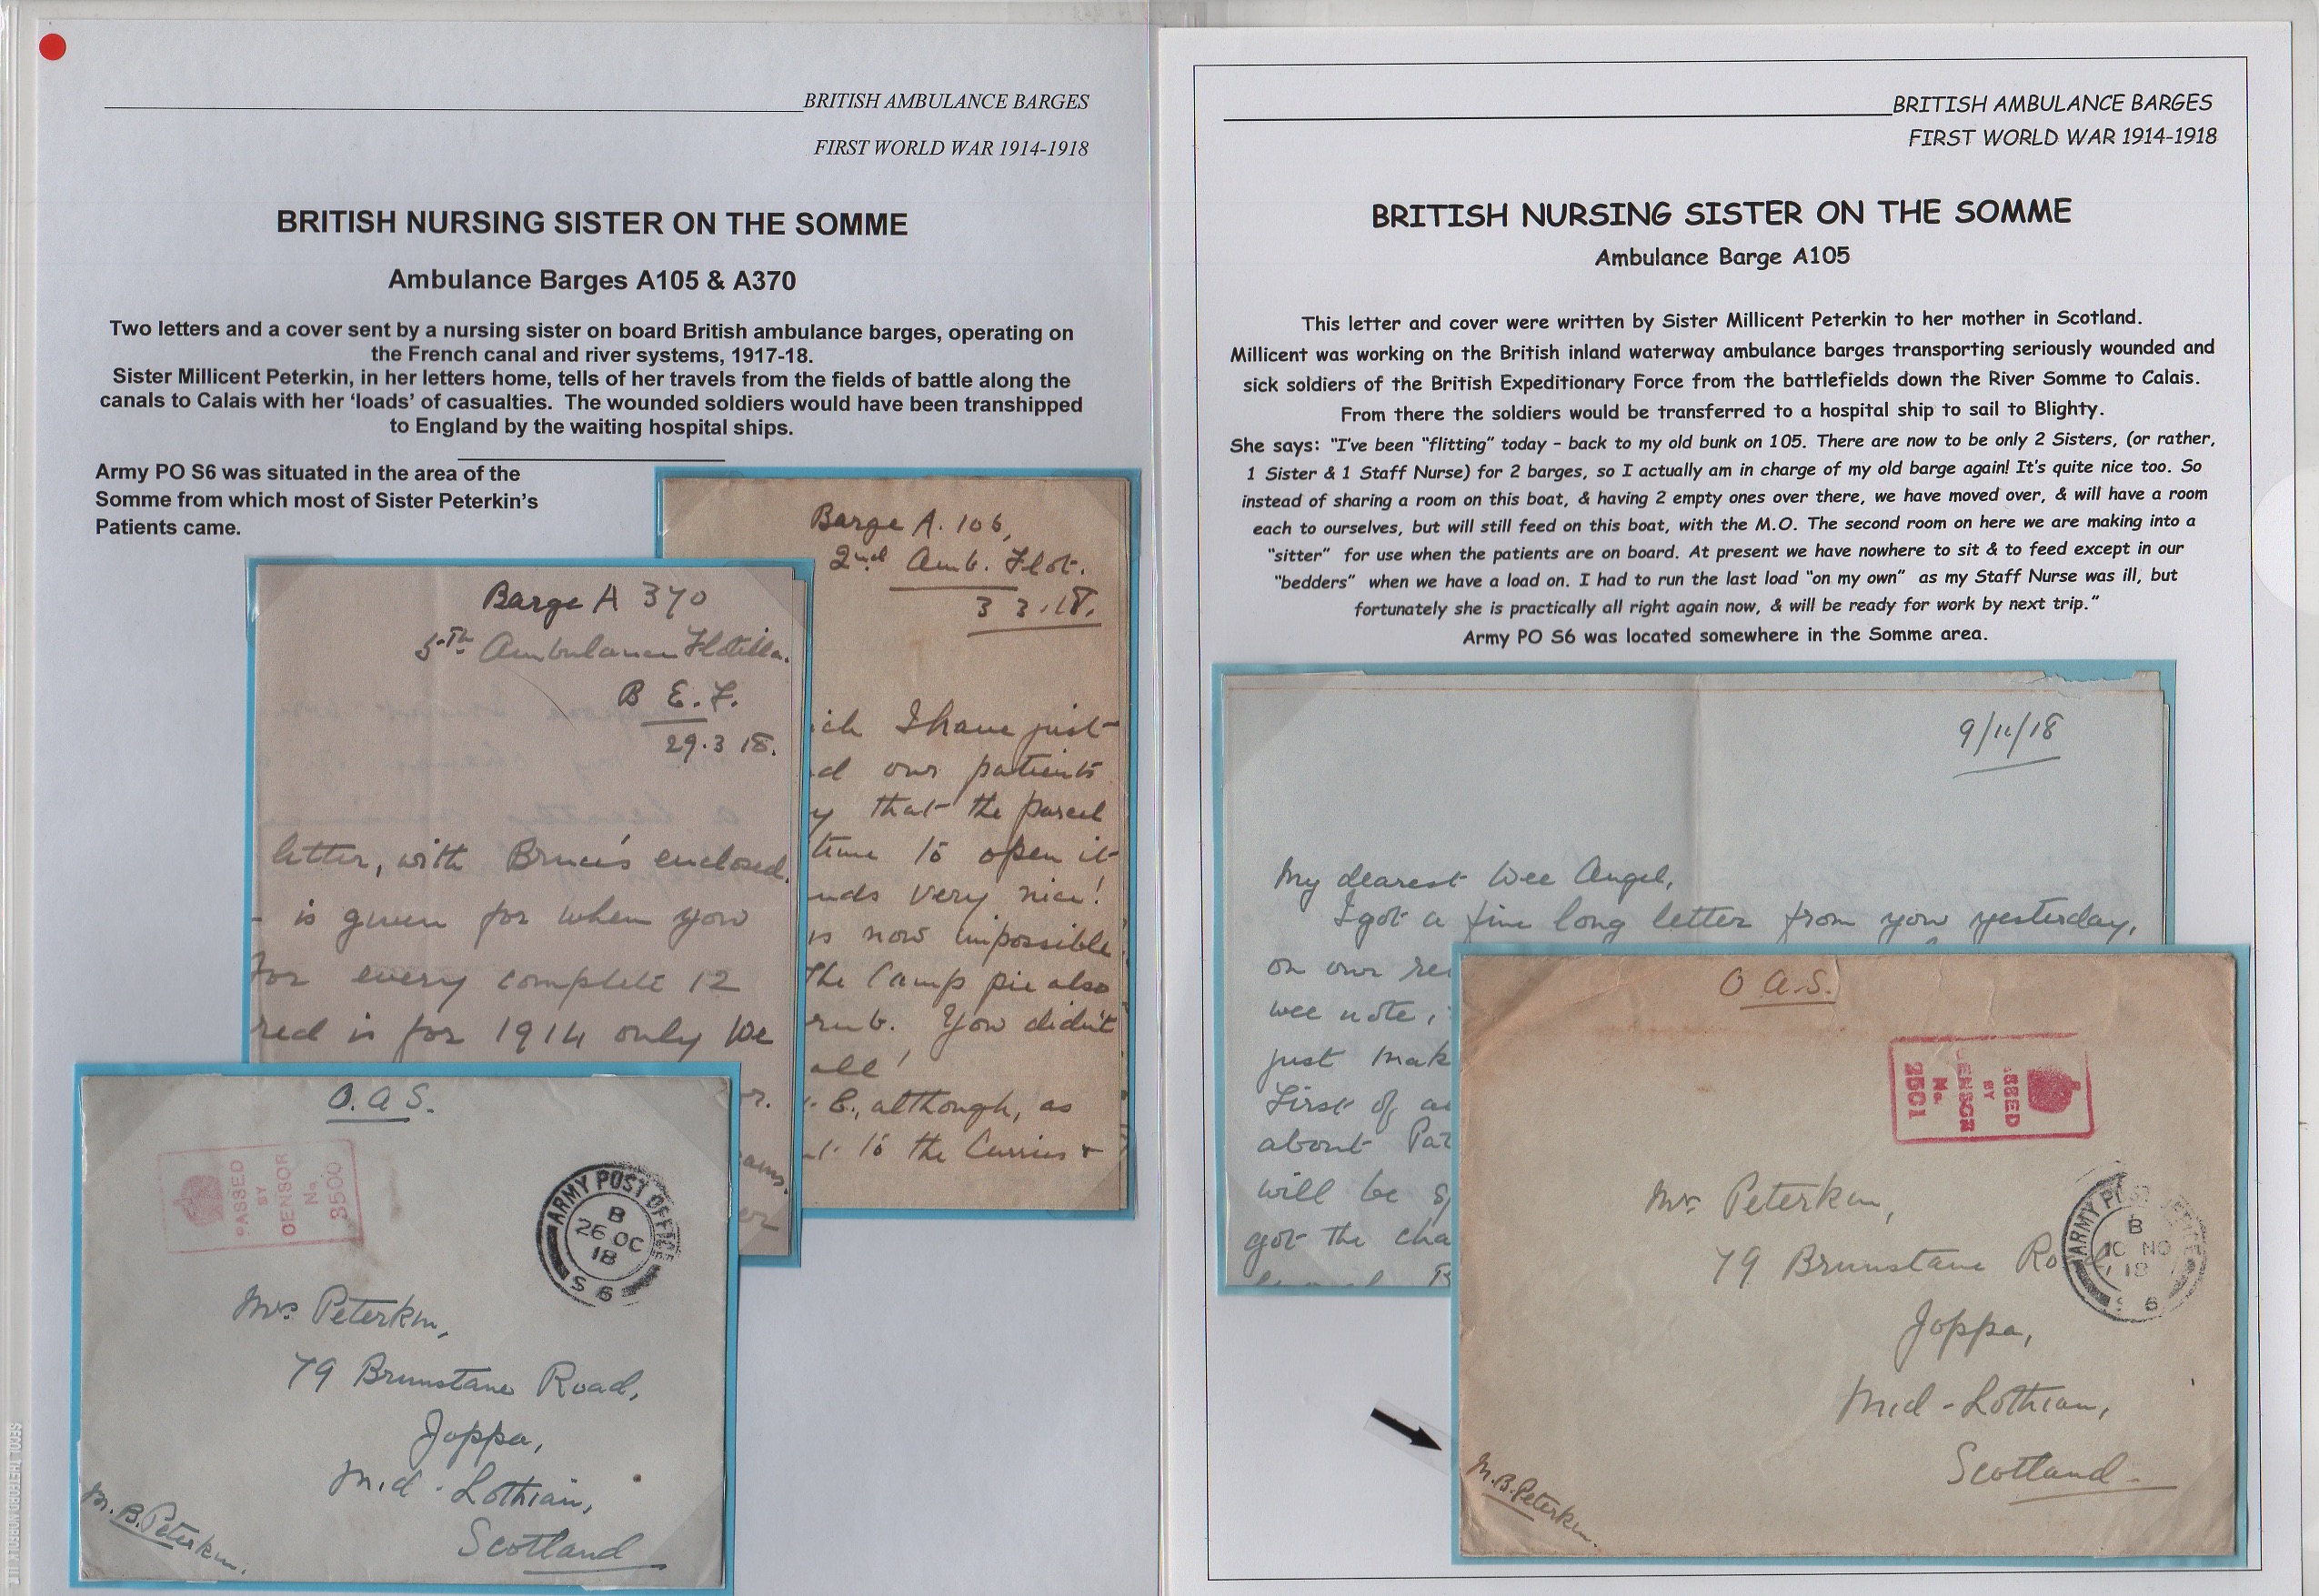 1917 (Sep 21) - 1918 (Dec 24) Covers with enclosed letters all from Sister Millicent Peterkin,